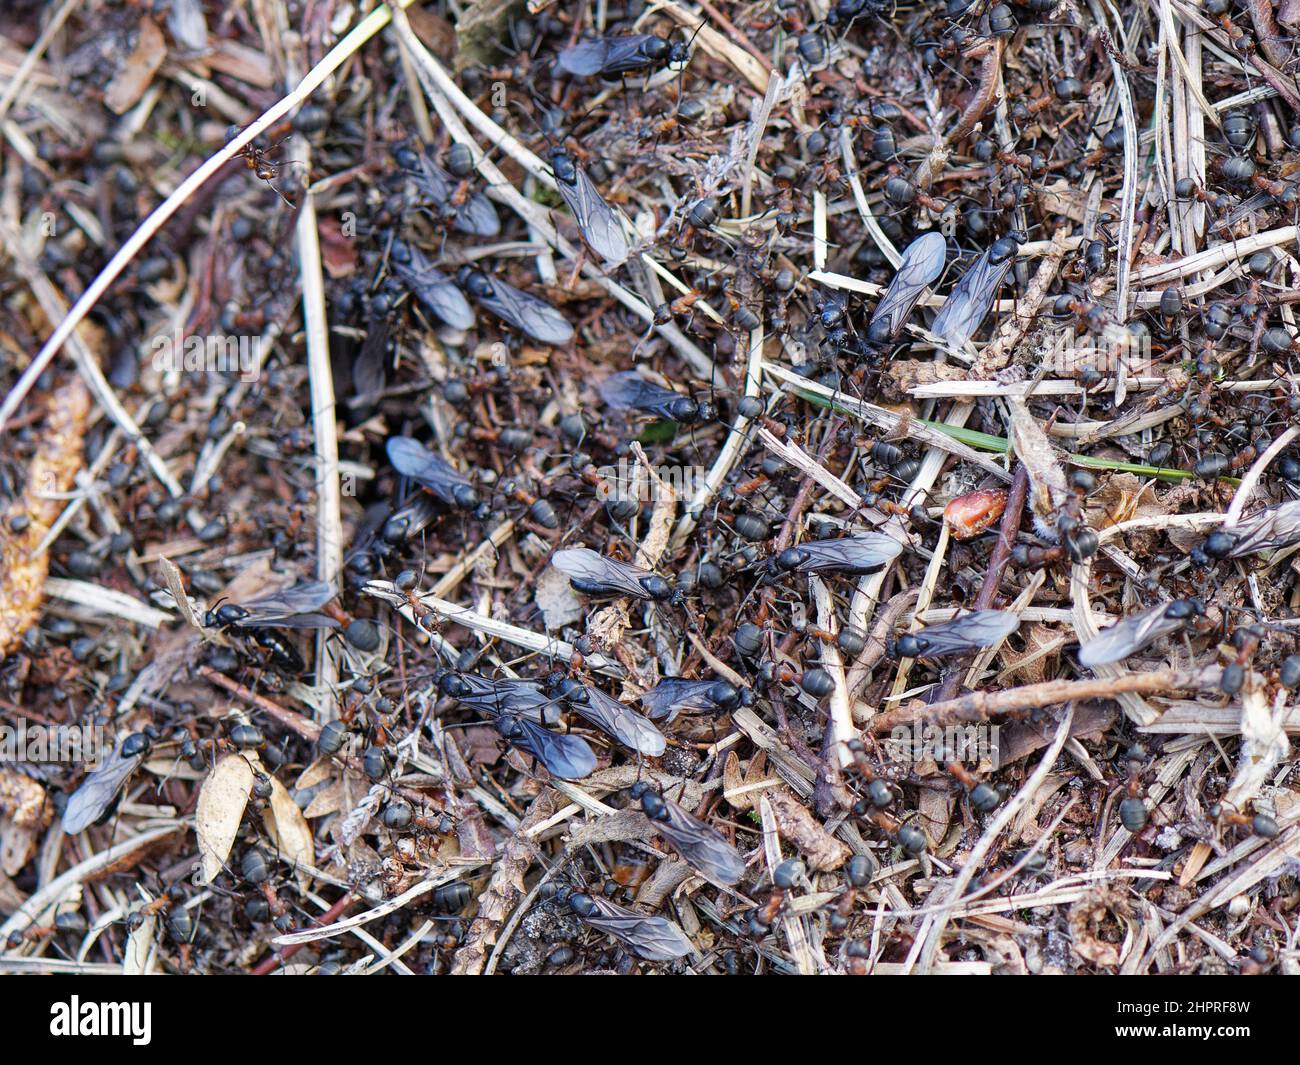 Southern wood ant (Formica rufa) nest surface with many workers and emerging winged male alates, Dorset heathland, UK, May. Stock Photo